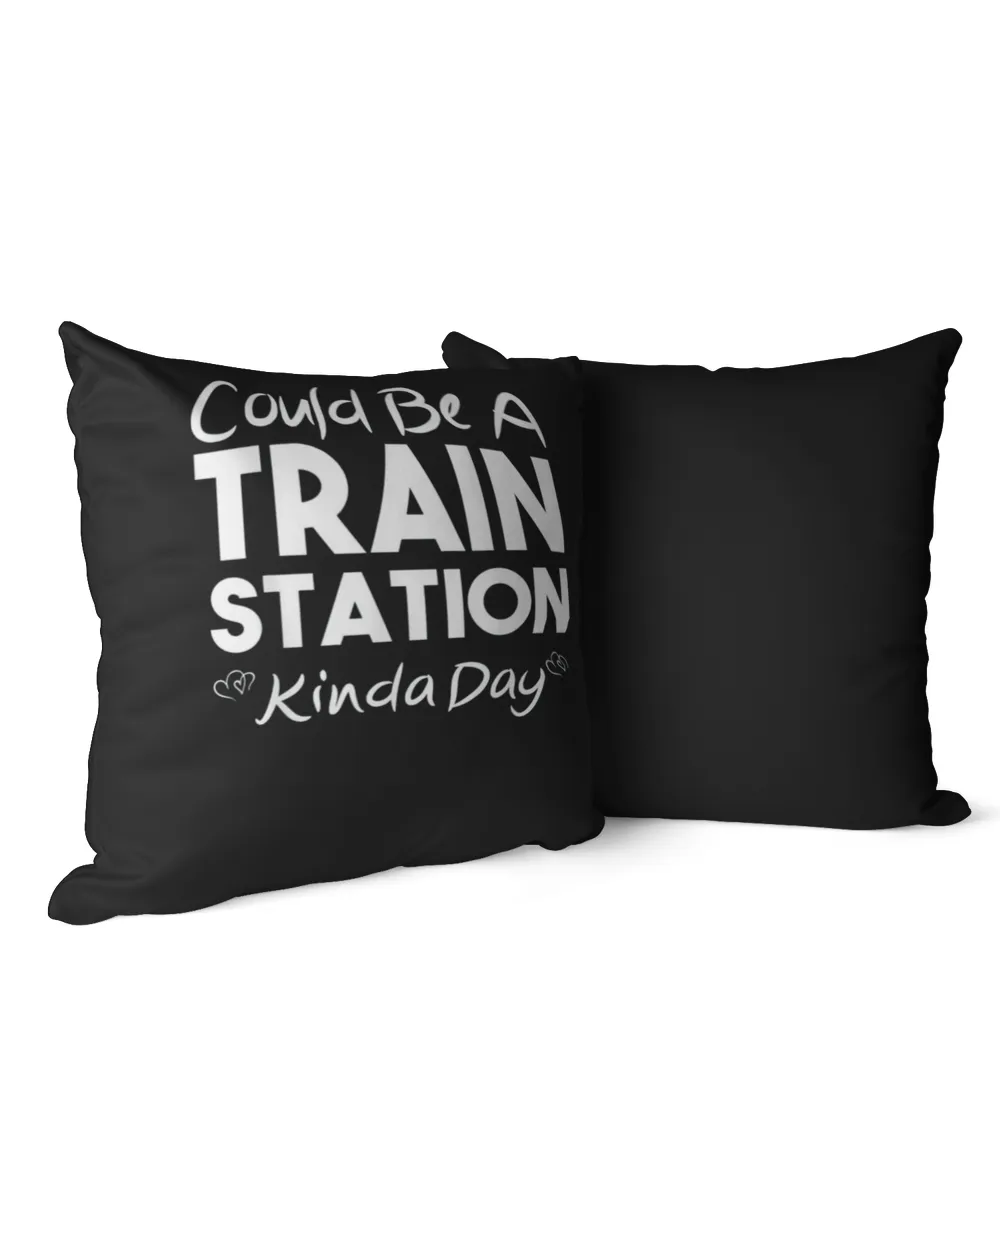 Could Be A Train Station Kinda Day T-Shirt